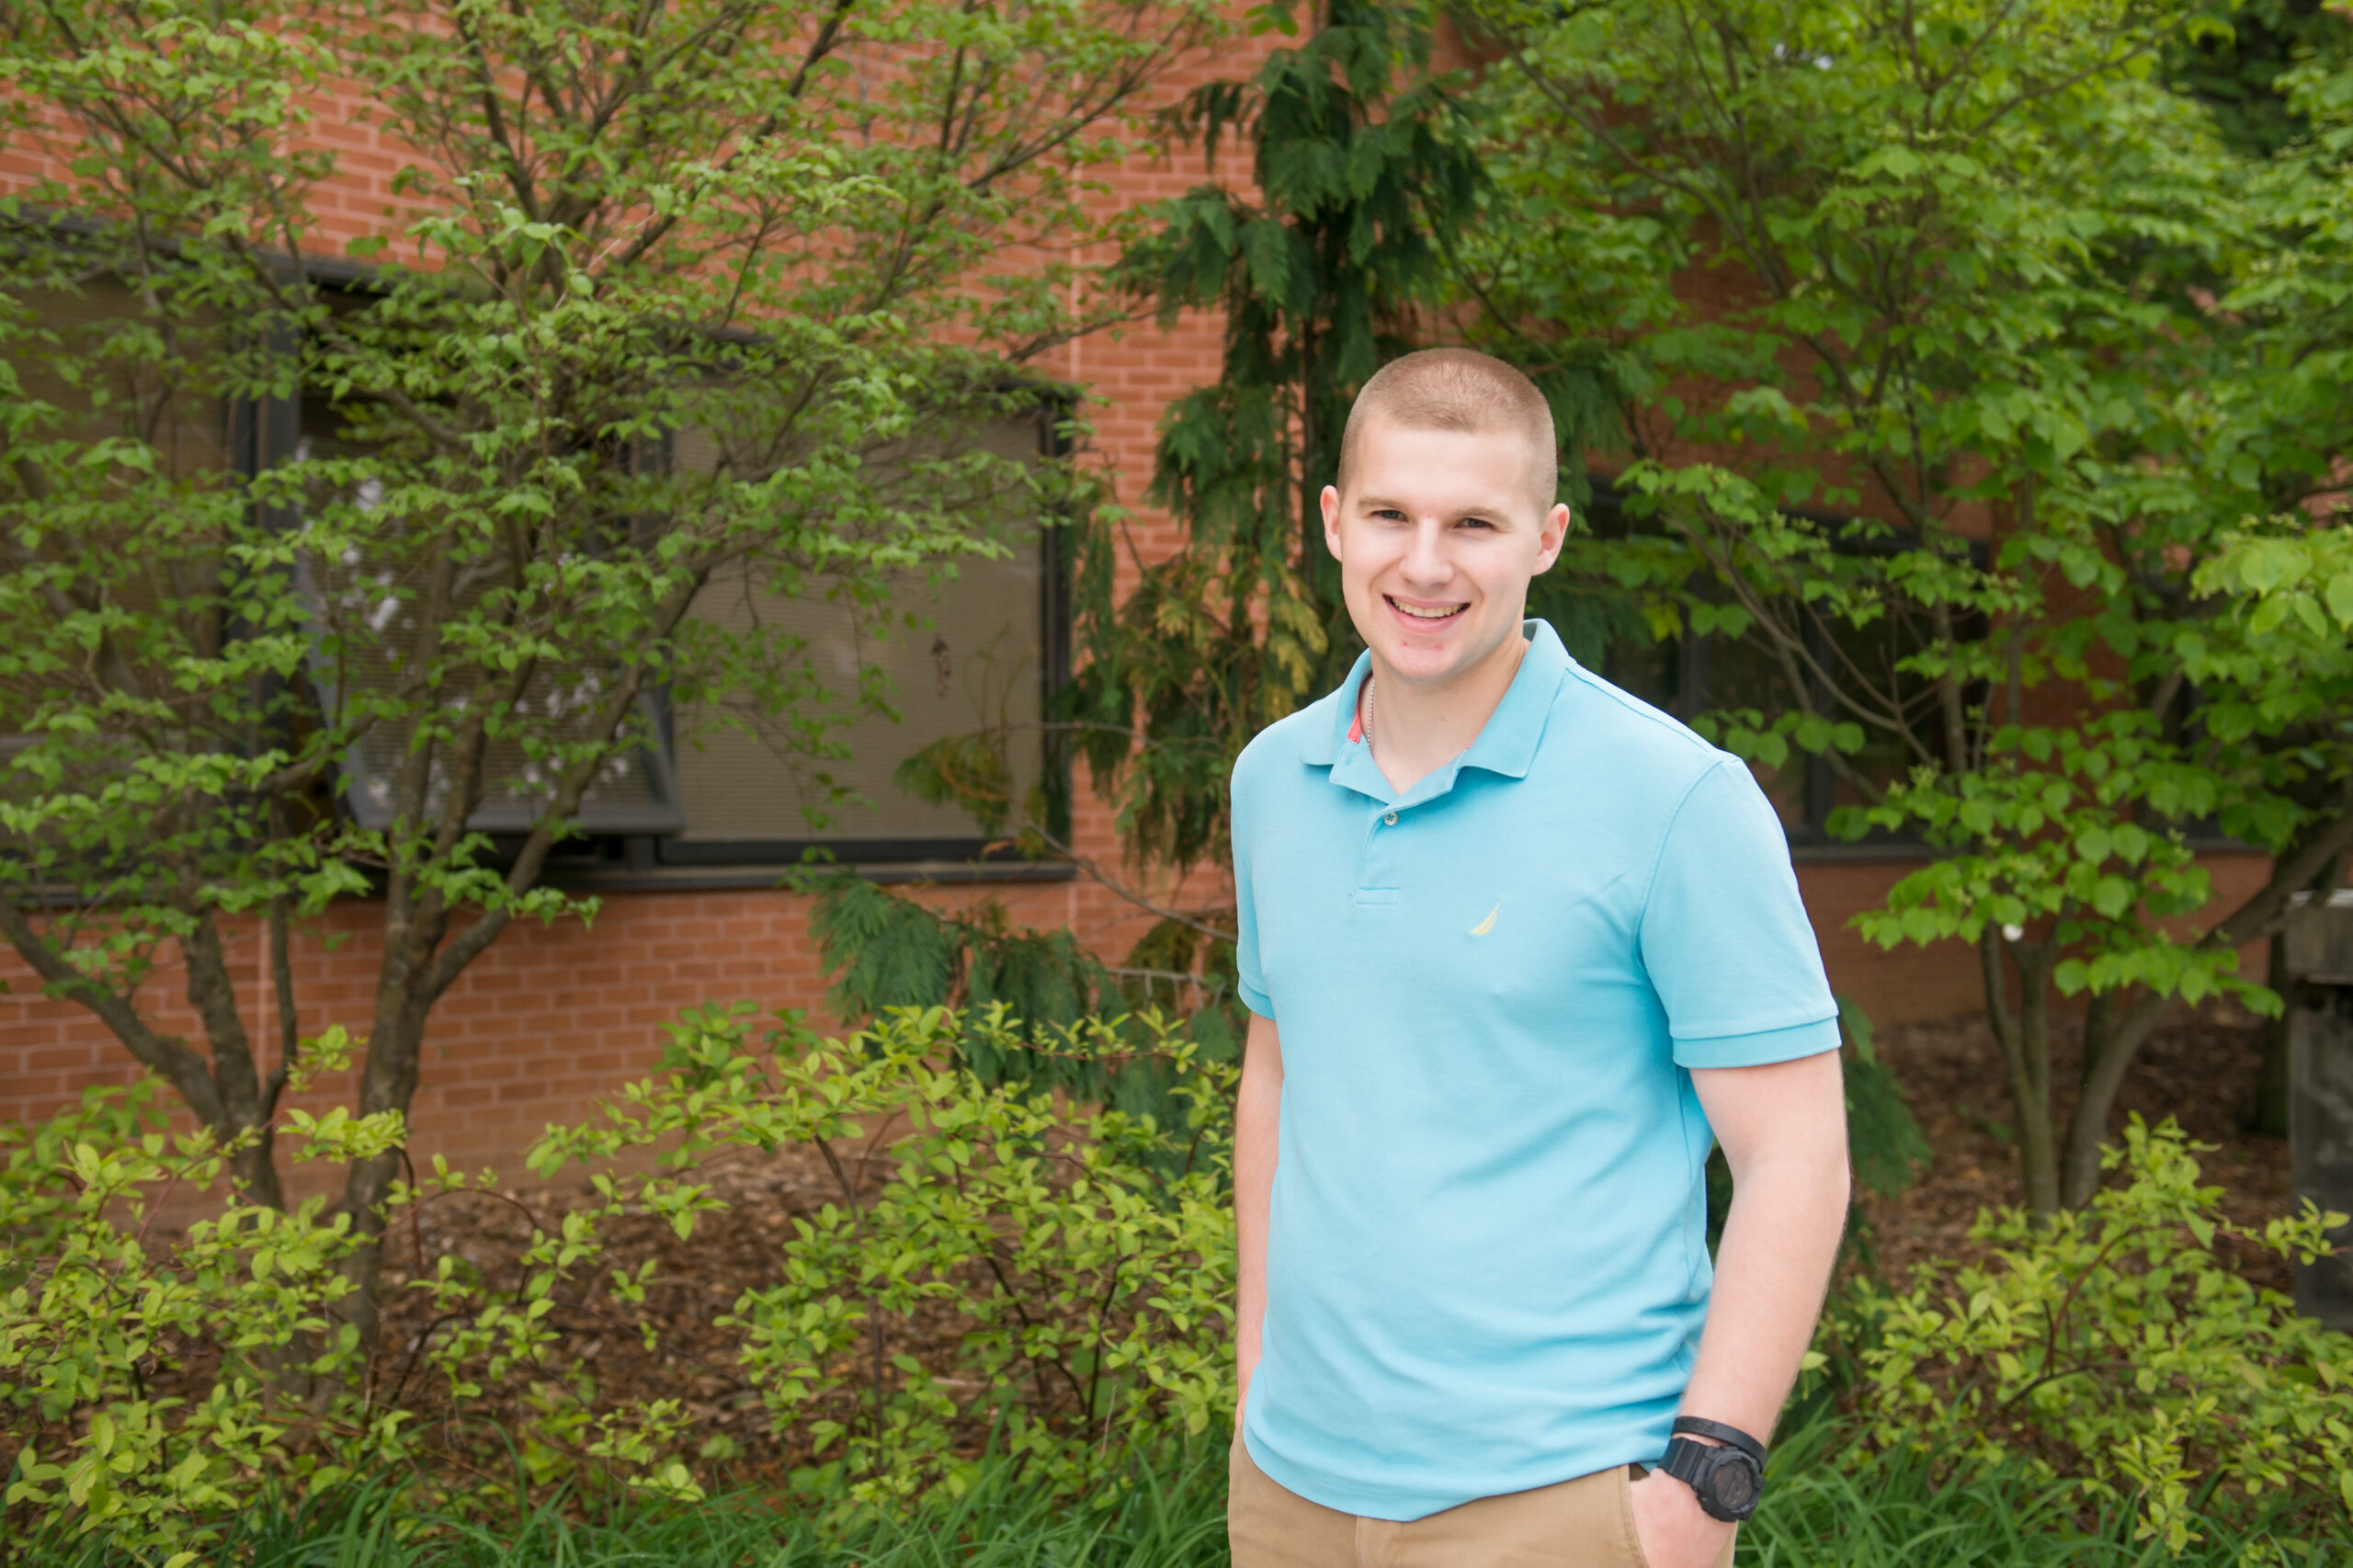 Mark Fisher’s UMBC experience prepares him for leadership role in U.S. Army Corps of Engineers